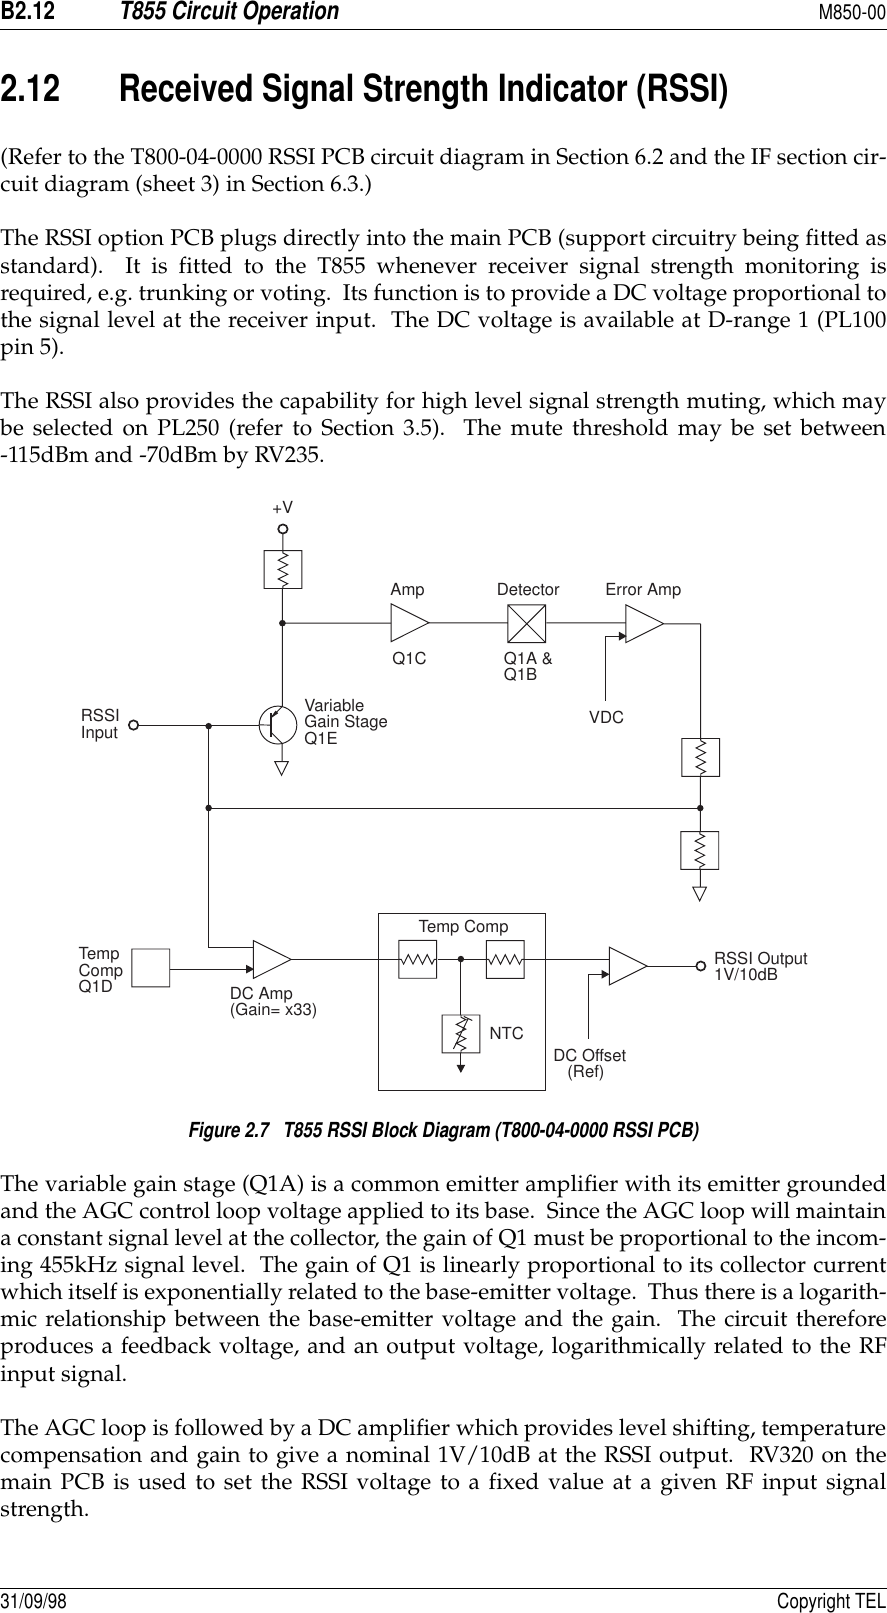 B2.12T855 Circuit OperationM850-0031/09/98 Copyright TEL2.12 Received Signal Strength Indicator (RSSI)(Refer to the T800-04-0000 RSSI PCB circuit diagram in Section 6.2 and the IF section cir-cuit diagram (sheet 3) in Section 6.3.)The RSSI option PCB plugs directly into the main PCB (support circuitry being fitted asstandard).  It is fitted to the T855 whenever receiver signal strength monitoring isrequired, e.g. trunking or voting.  Its function is to provide a DC voltage proportional tothe signal level at the receiver input.  The DC voltage is available at D-range 1 (PL100pin 5).The RSSI also provides the capability for high level signal strength muting, which maybe selected on PL250 (refer to Section 3.5).  The mute threshold may be set between-115dBm and -70dBm by RV235.Figure 2.7   T855 RSSI Block Diagram (T800-04-0000 RSSI PCB)The variable gain stage (Q1A) is a common emitter amplifier with its emitter groundedand the AGC control loop voltage applied to its base.  Since the AGC loop will maintaina constant signal level at the collector, the gain of Q1 must be proportional to the incom-ing 455kHz signal level.  The gain of Q1 is linearly proportional to its collector currentwhich itself is exponentially related to the base-emitter voltage.  Thus there is a logarith-mic relationship between the base-emitter voltage and the gain.  The circuit thereforeproduces a feedback voltage, and an output voltage, logarithmically related to the RFinput signal.The AGC loop is followed by a DC amplifier which provides level shifting, temperaturecompensation and gain to give a nominal 1V/10dB at the RSSI output.  RV320 on themain PCB is used to set the RSSI voltage to a fixed value at a given RF input signalstrength.+VAmp Detector Error AmpQ1C Q1A &amp;Q1B                 VDCVariableGain StageQ1ERSSIInputTemp CompNTCDC Amp(Gain= x33)TempCompQ1DDC Offset(Ref)RSSI Output1V/10dB